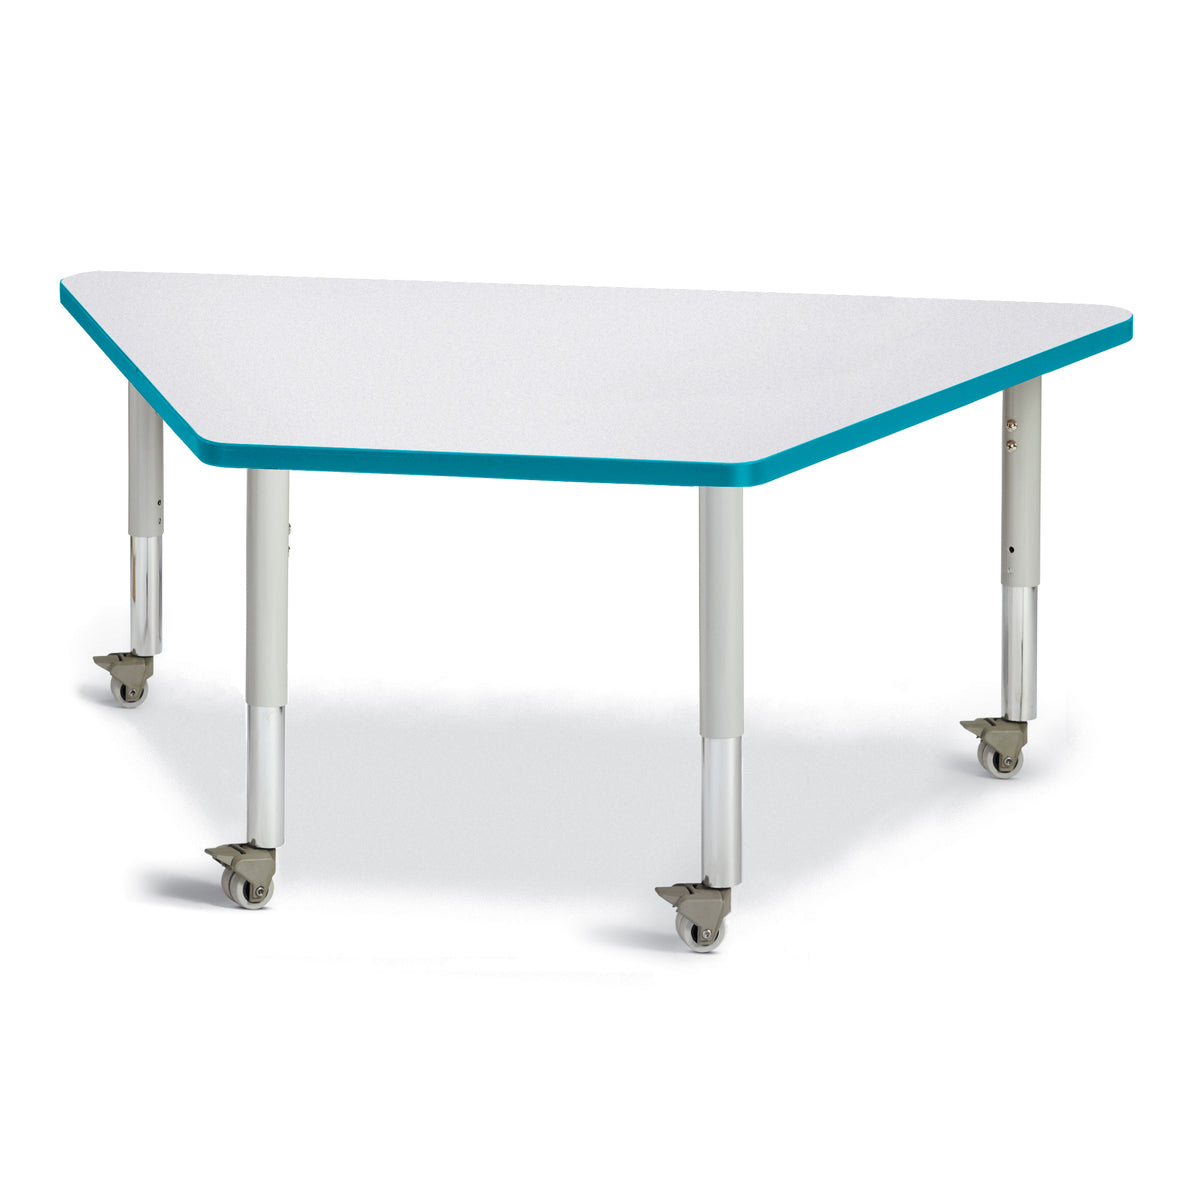 6443JCM005, Berries Trapezoid Activity Tables - 30" X 60", Mobile - Freckled Gray/Teal/Gray